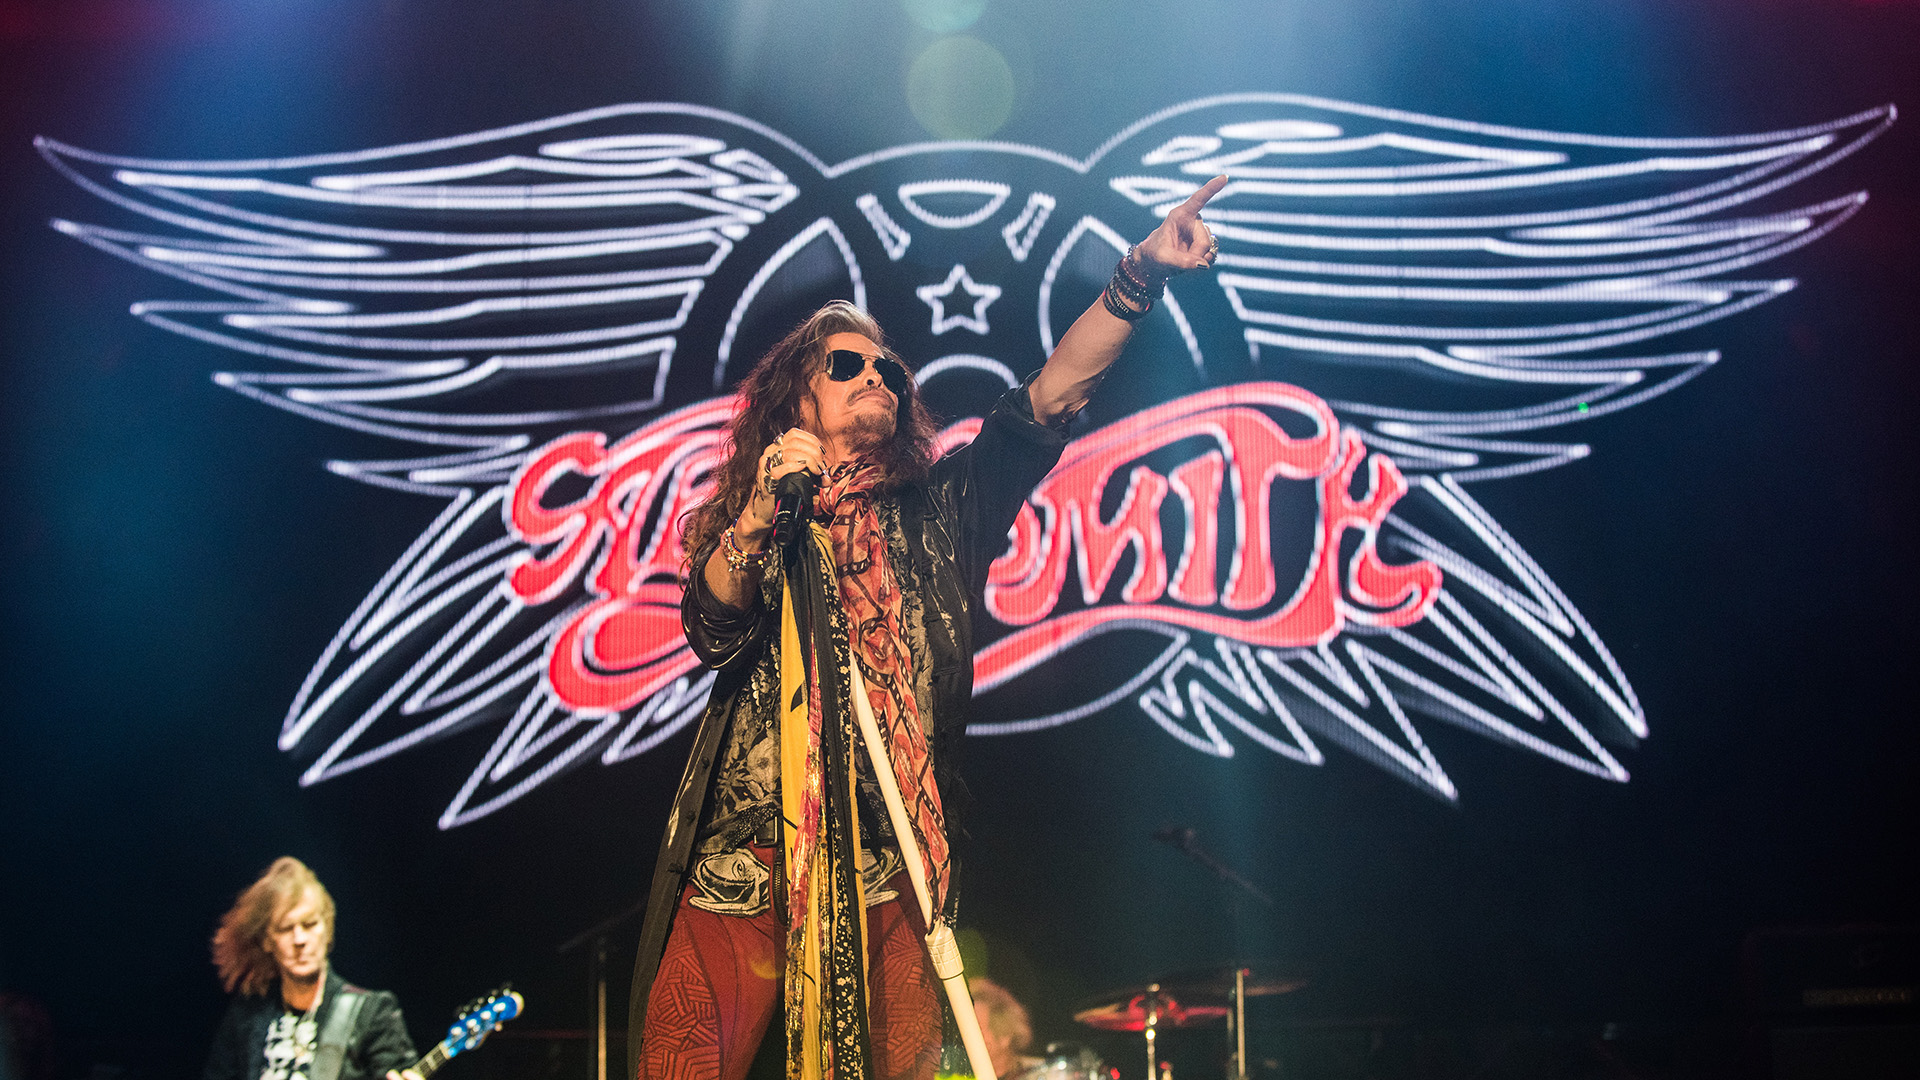 Musician Steven Tyler of Aerosmith performs on the Sunset Cliffs Stage during the 2016 KAABOO Del Mar at the Del Mar Fairgrounds on September 17, 2016 in Del Mar, California.